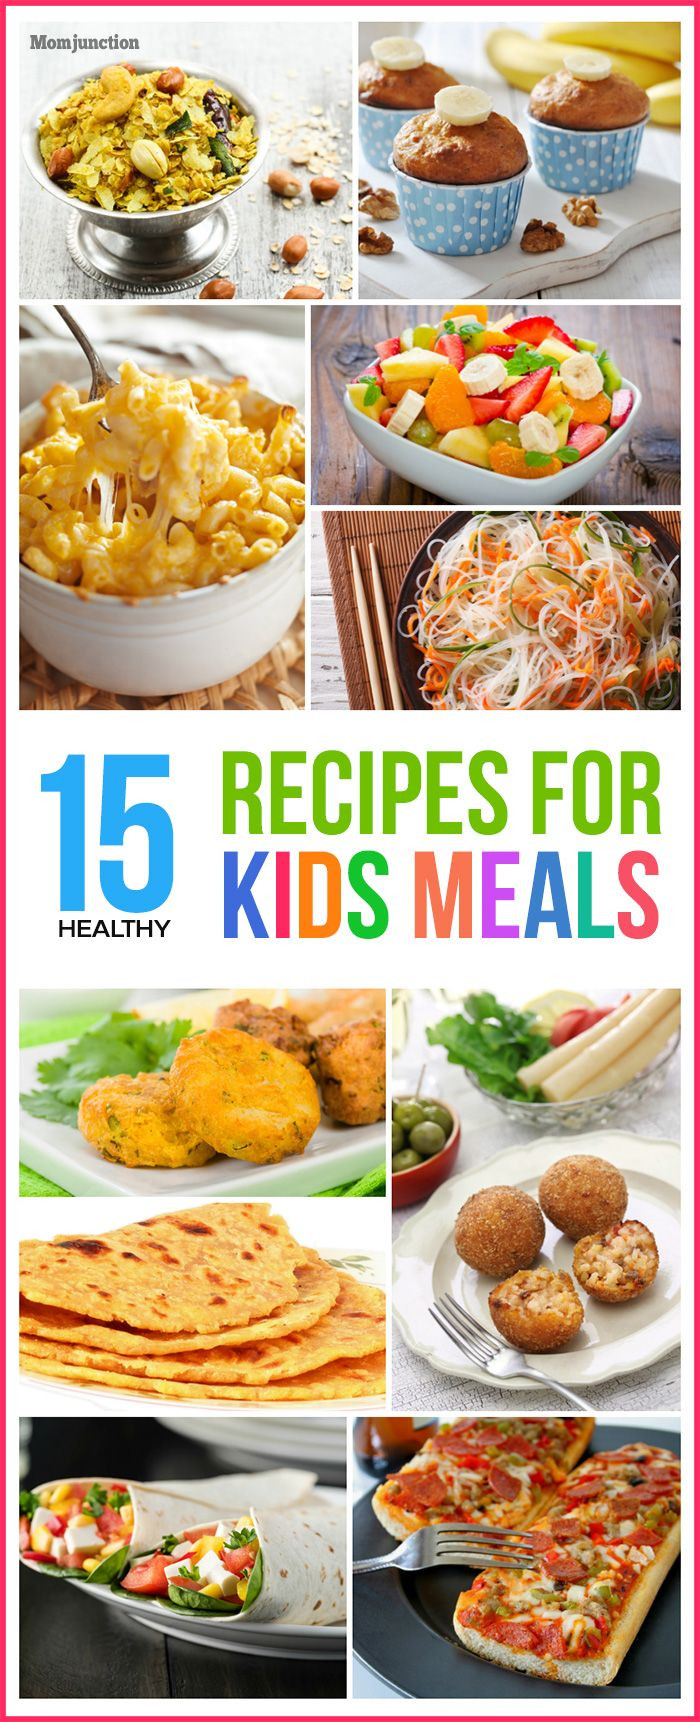 Fun Healthy Recipes For Kids
 Top 15 Healthy Recipes For Kids Meals